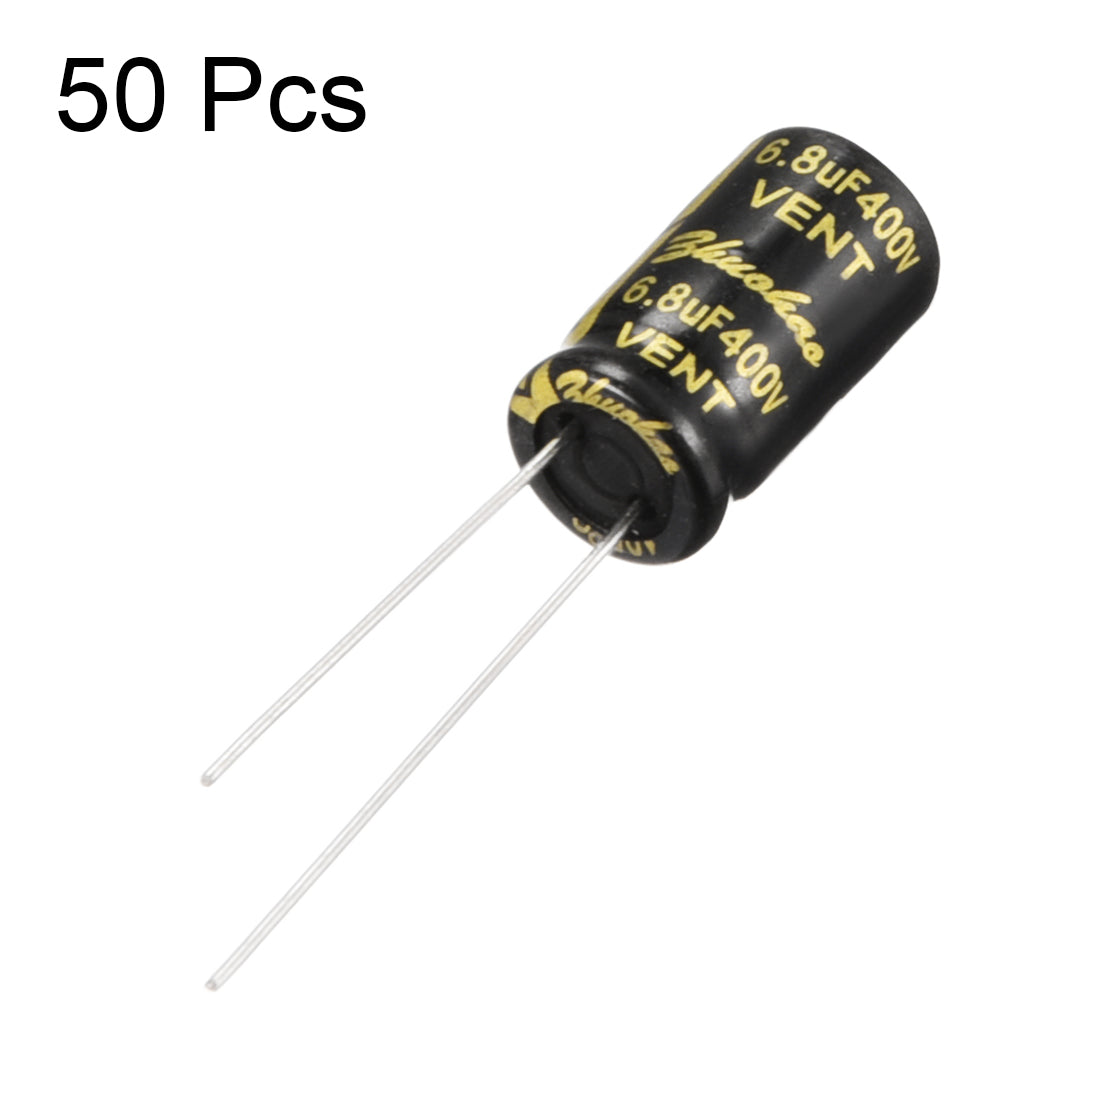 uxcell Uxcell Aluminum Radial Electrolytic Capacitor with 6.8uF 400V 105 Celsius Life 2000H 8 x 14 mm Black 50pcs